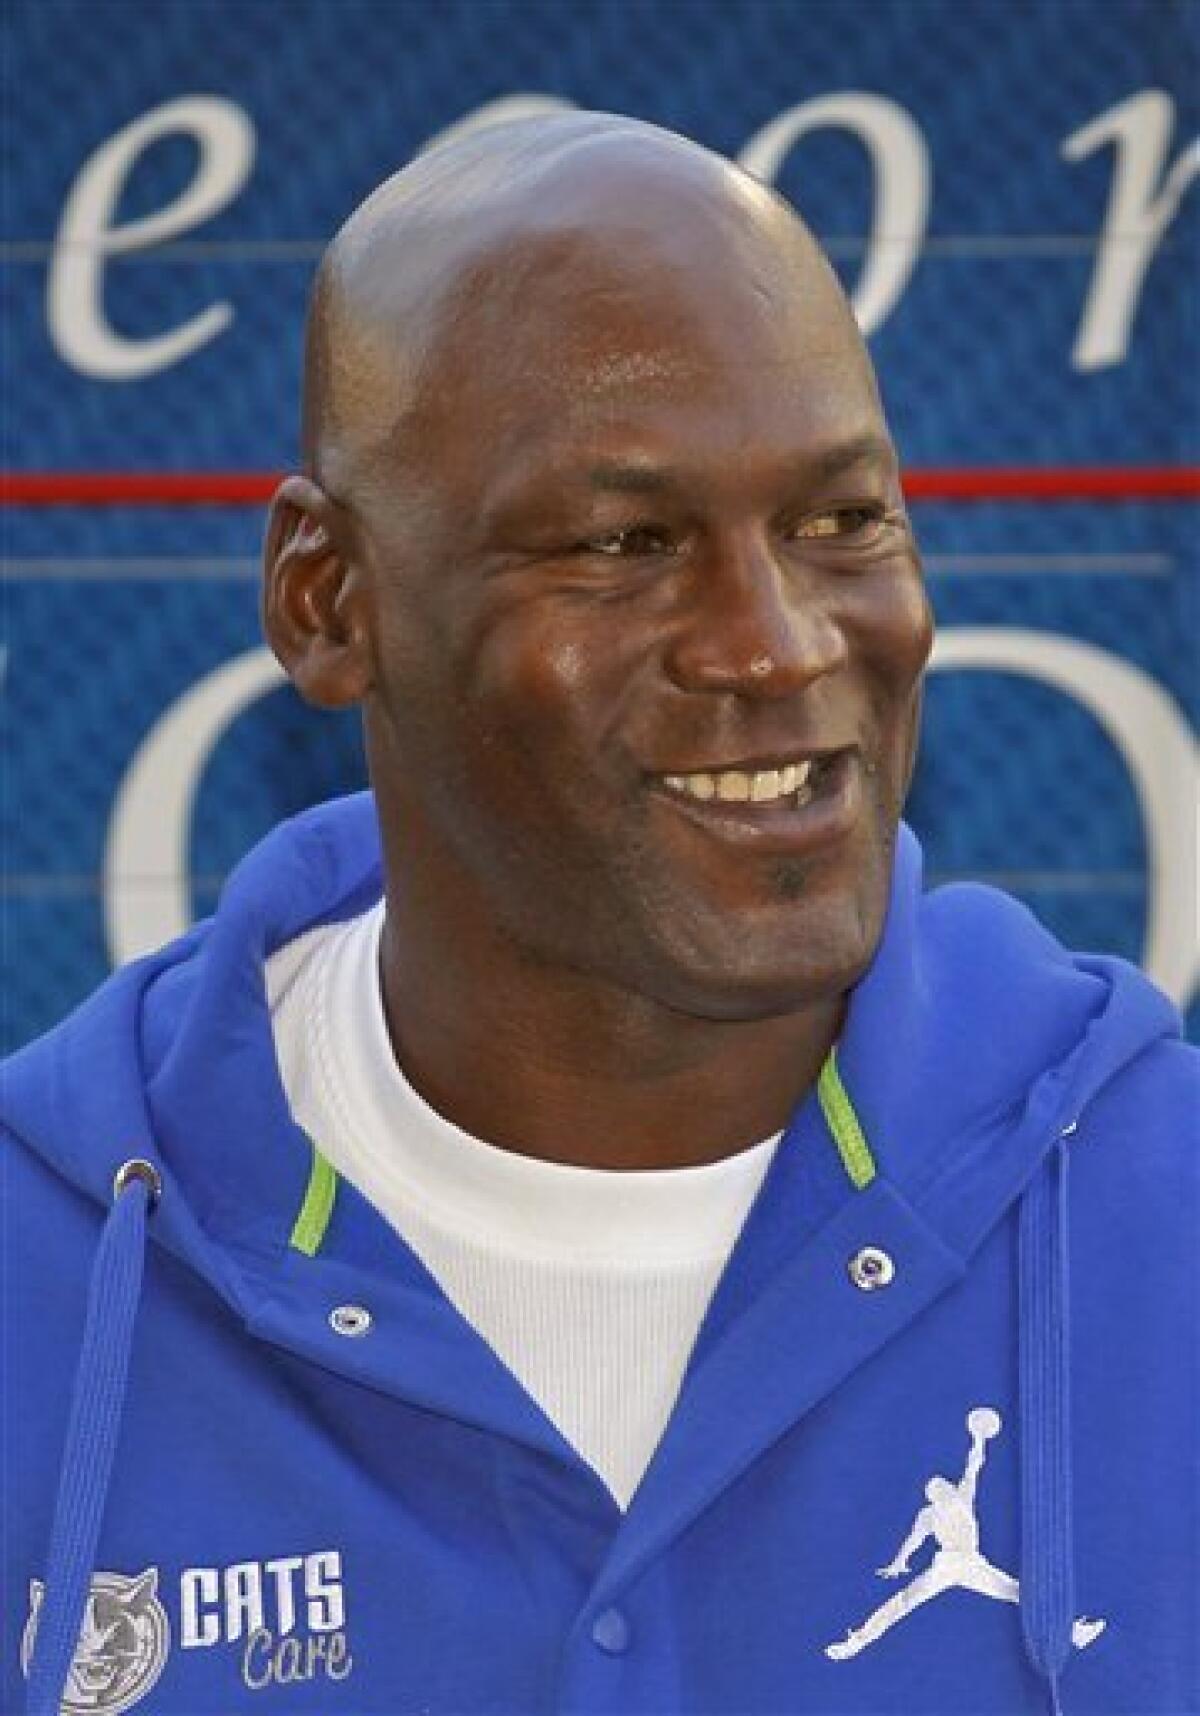 Michael Jordan-owned Charlotte Bobcats could become worst team in NBA  history